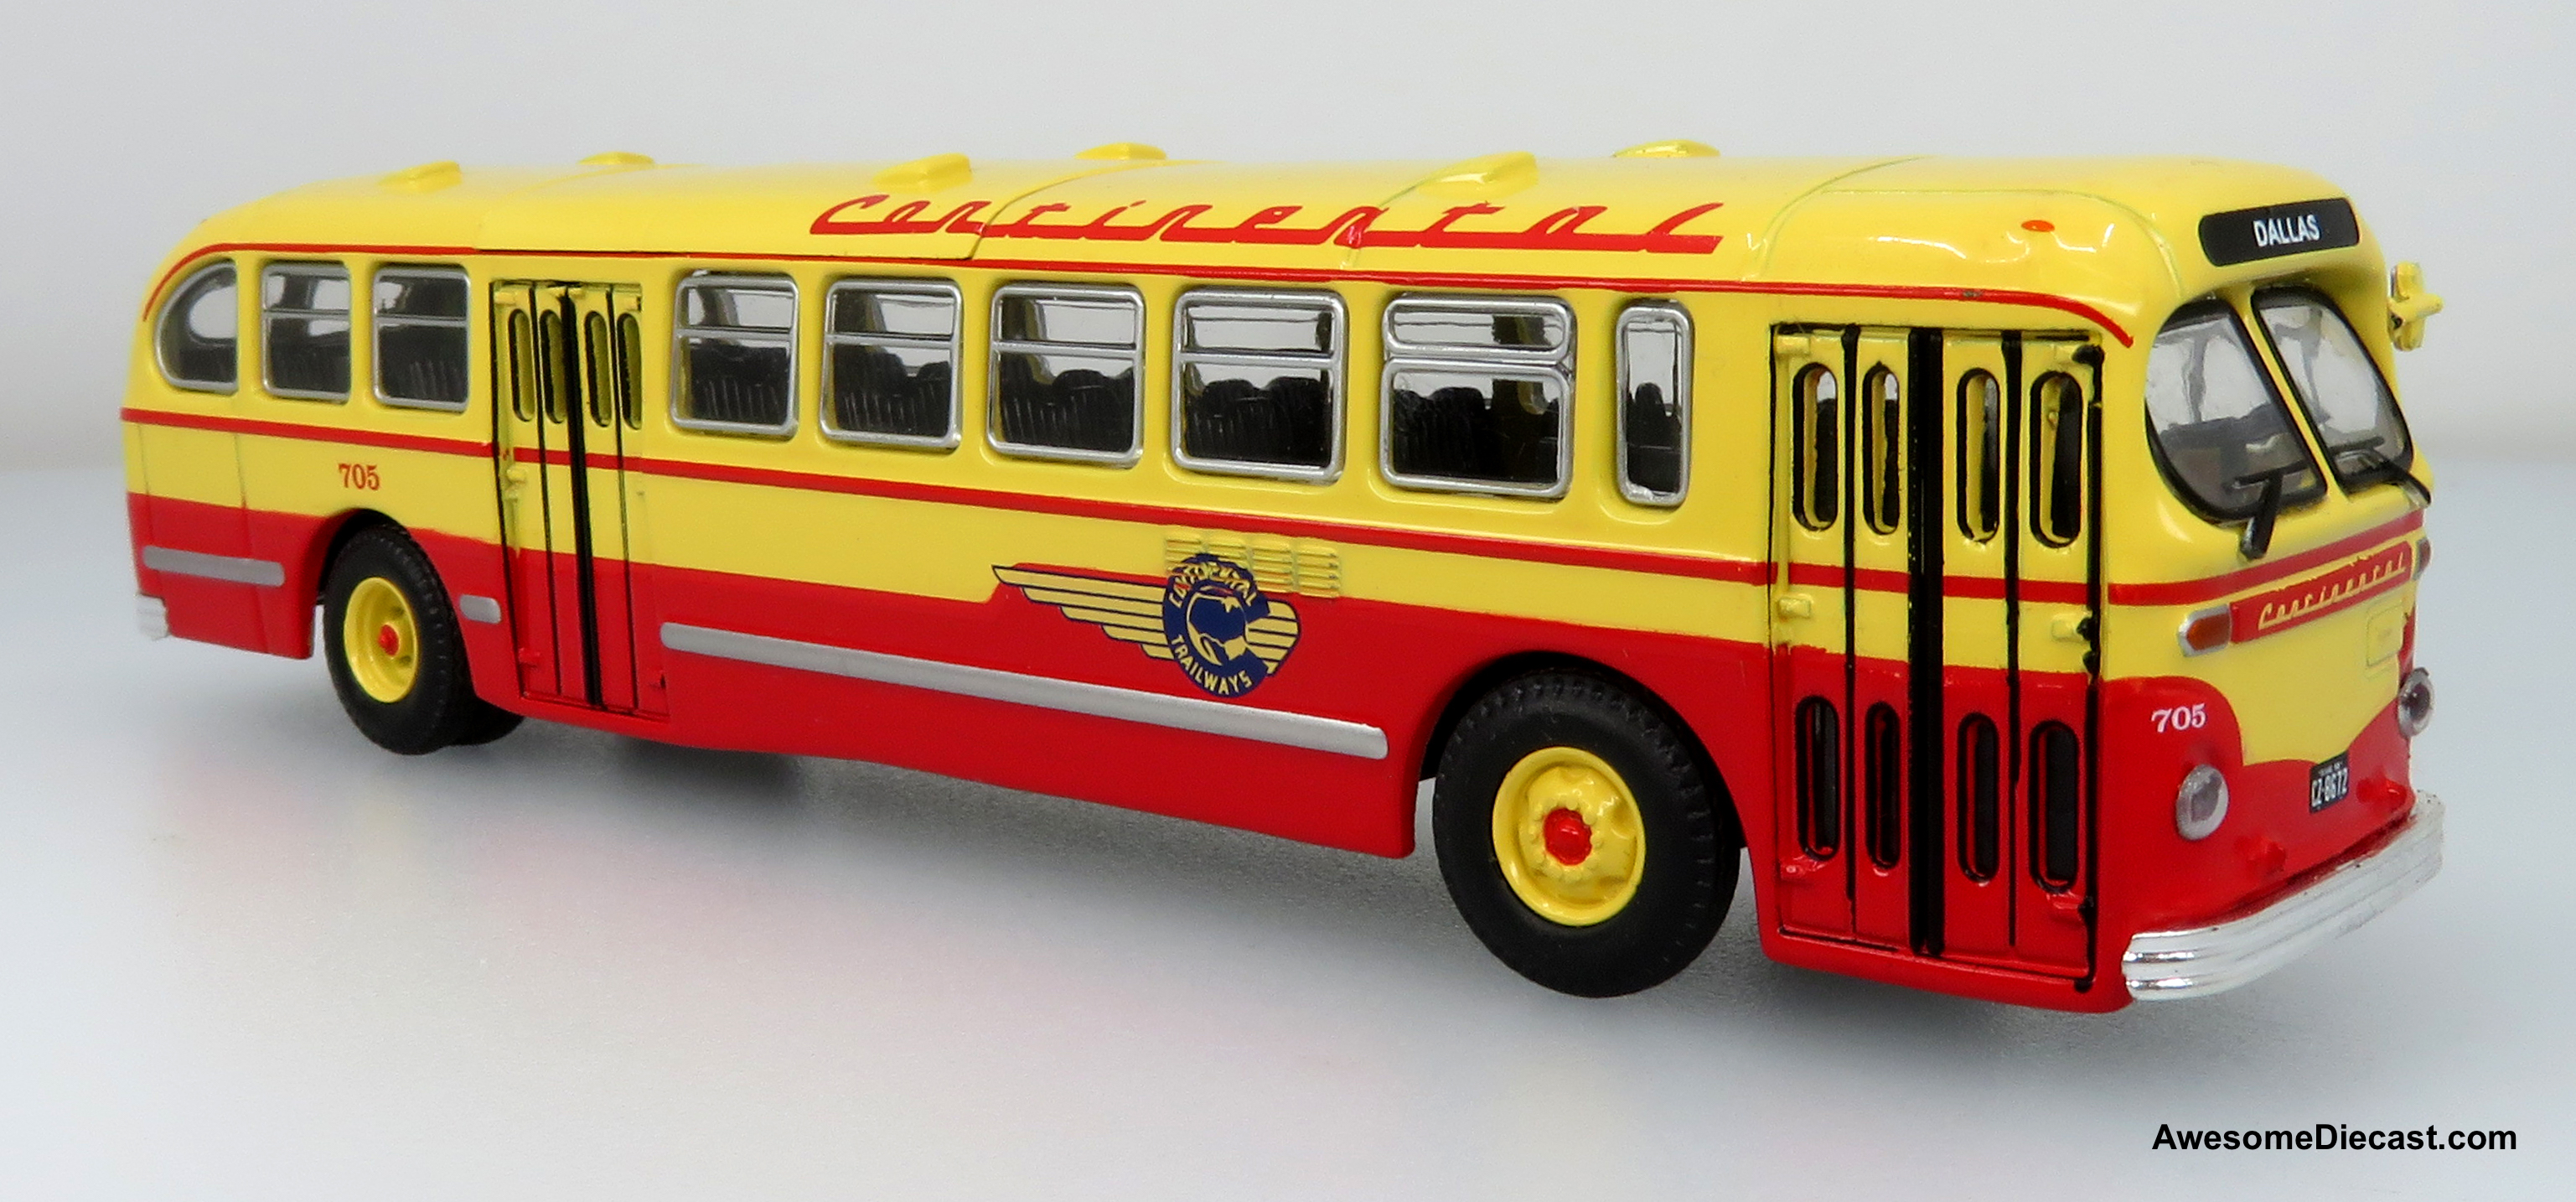 Iconic Replicas 1:87 1952 CCF Brill CD-44 Transit Bus: Continental Trailways